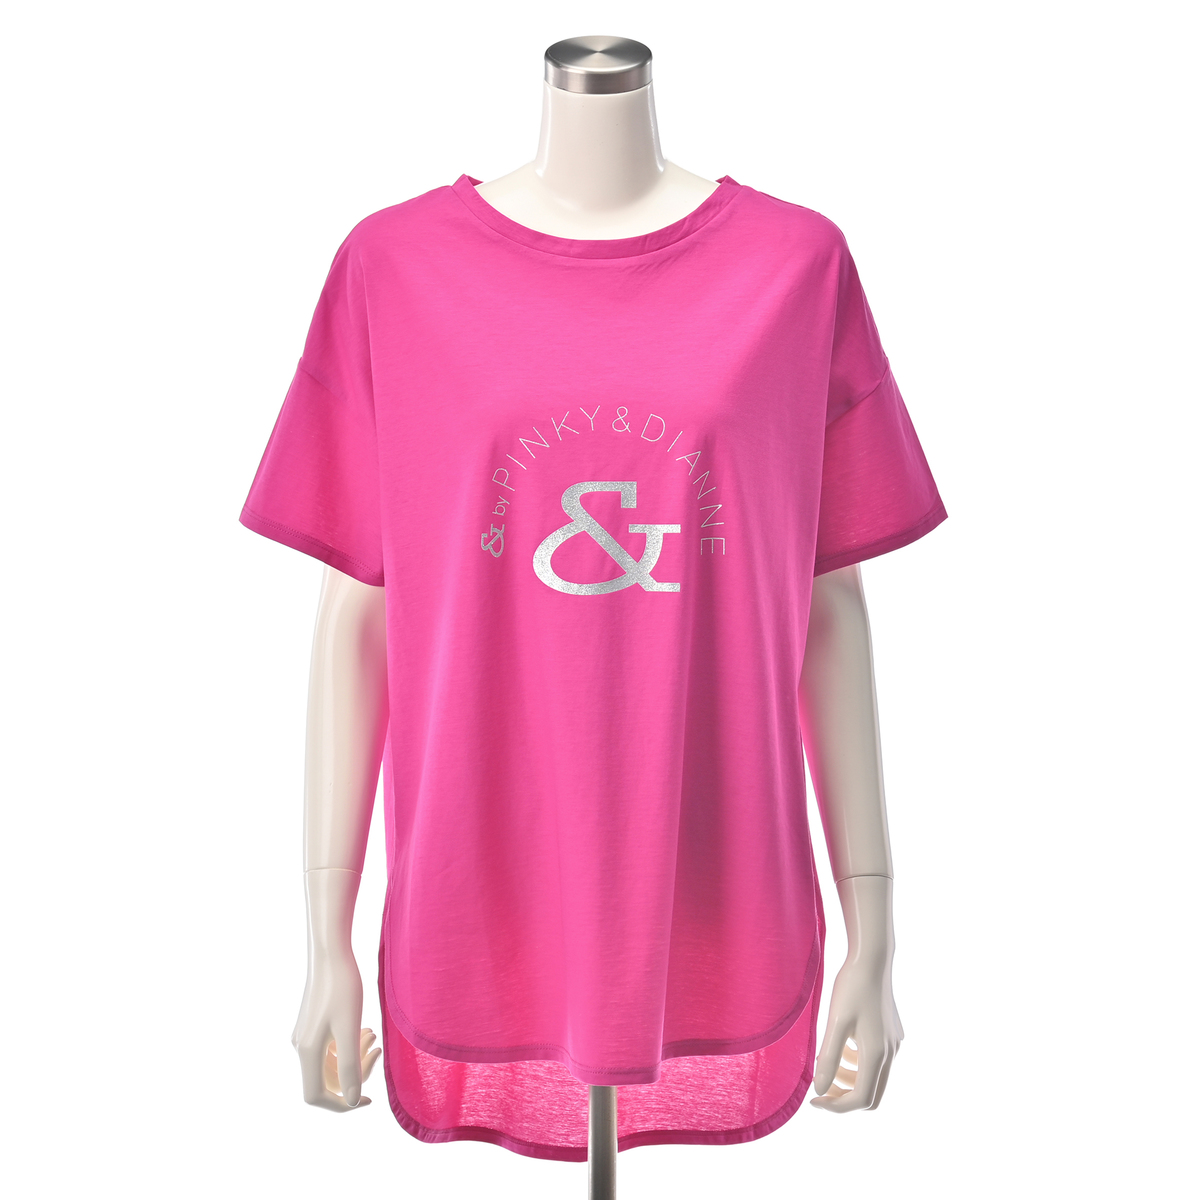 & by PINKY & DIANNE ロゴ入りTシャツ